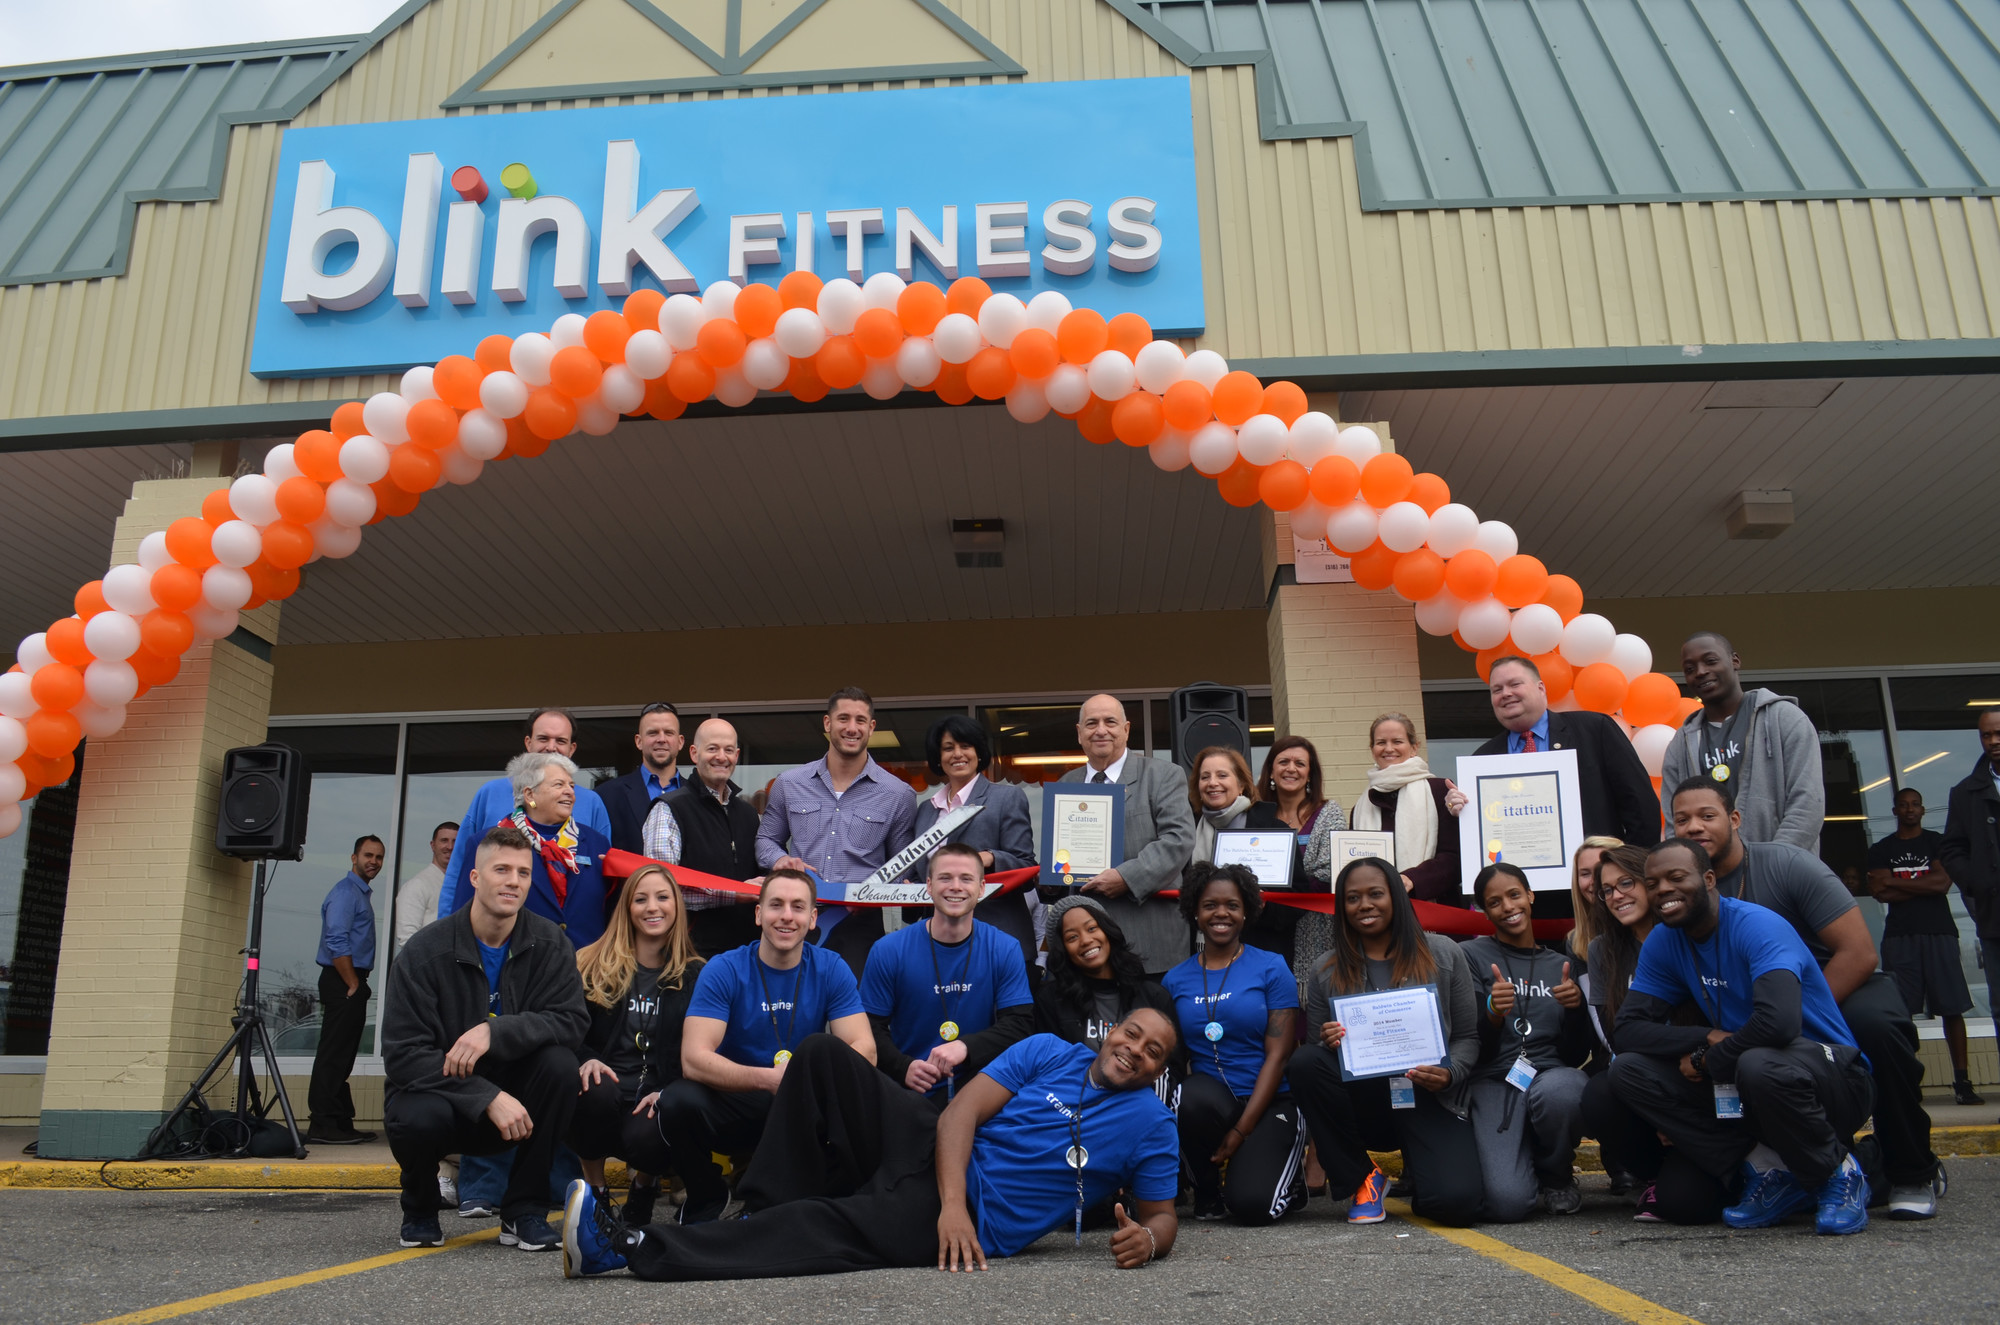 Blink Fitness officially opened for business in Baldwin last week.